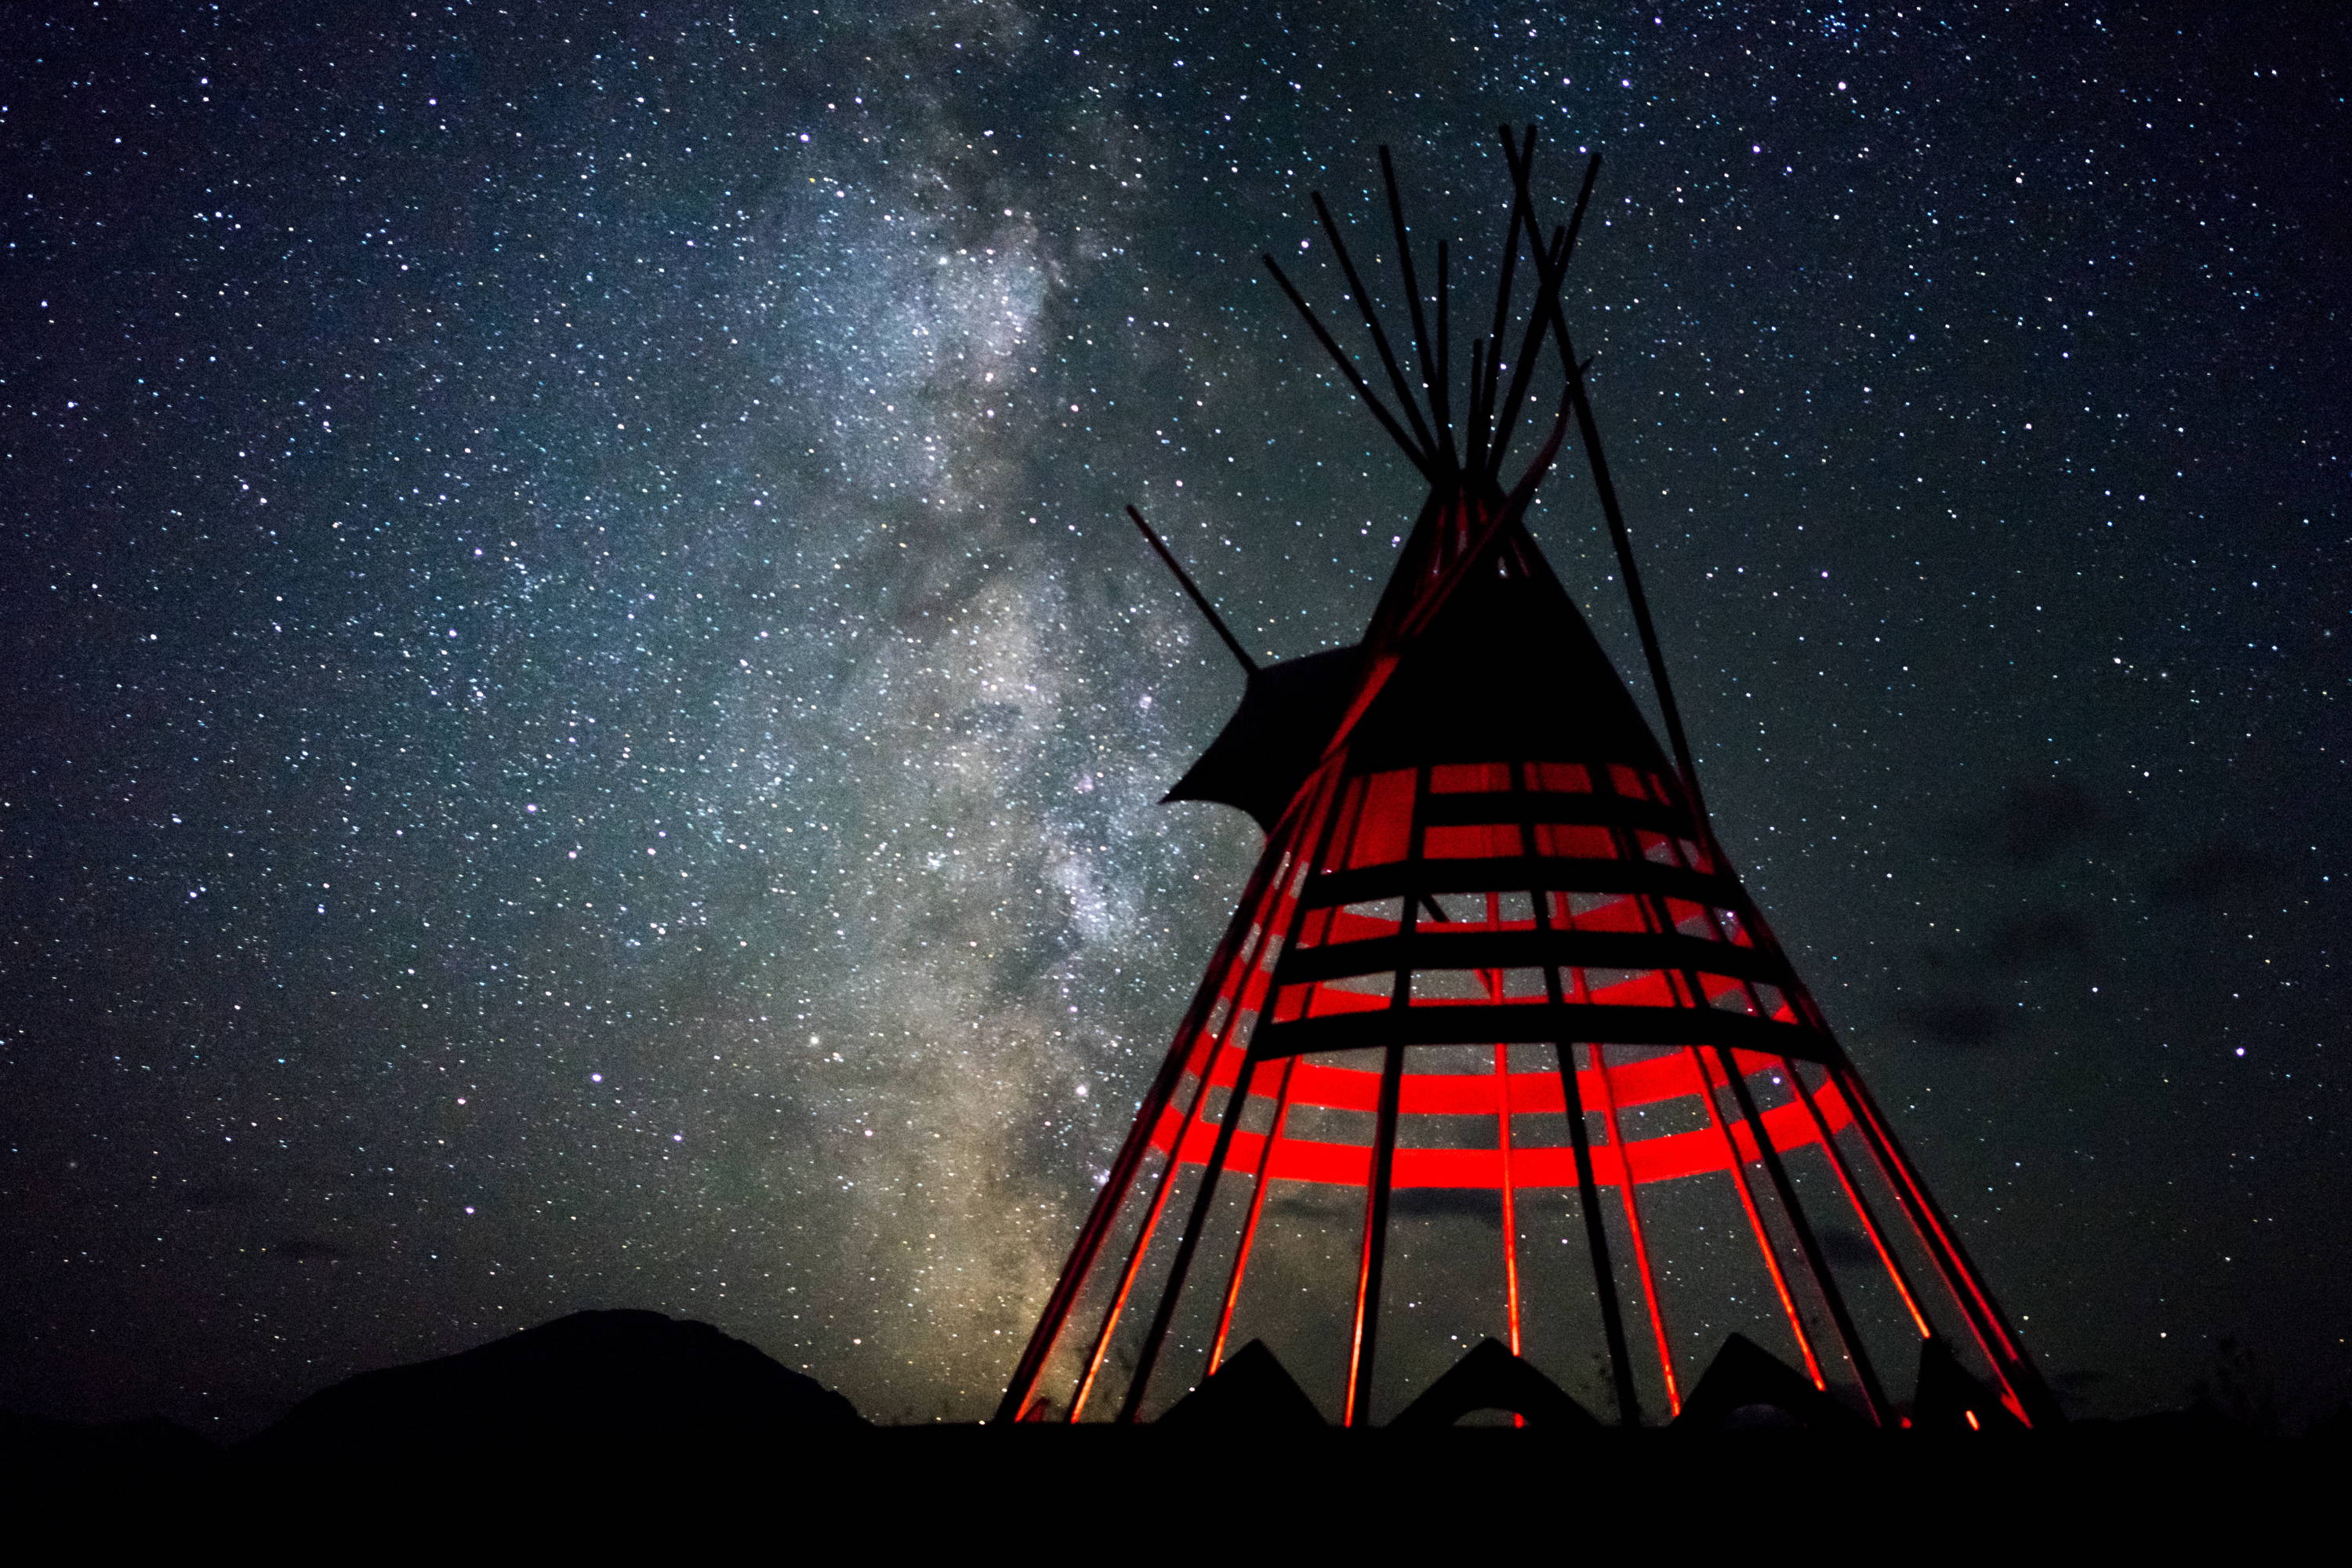 Bozeman Hot Springs & 11 Things to Do Beyond. Tee-pee without canvas displays internal light as stars in night sky shine above.